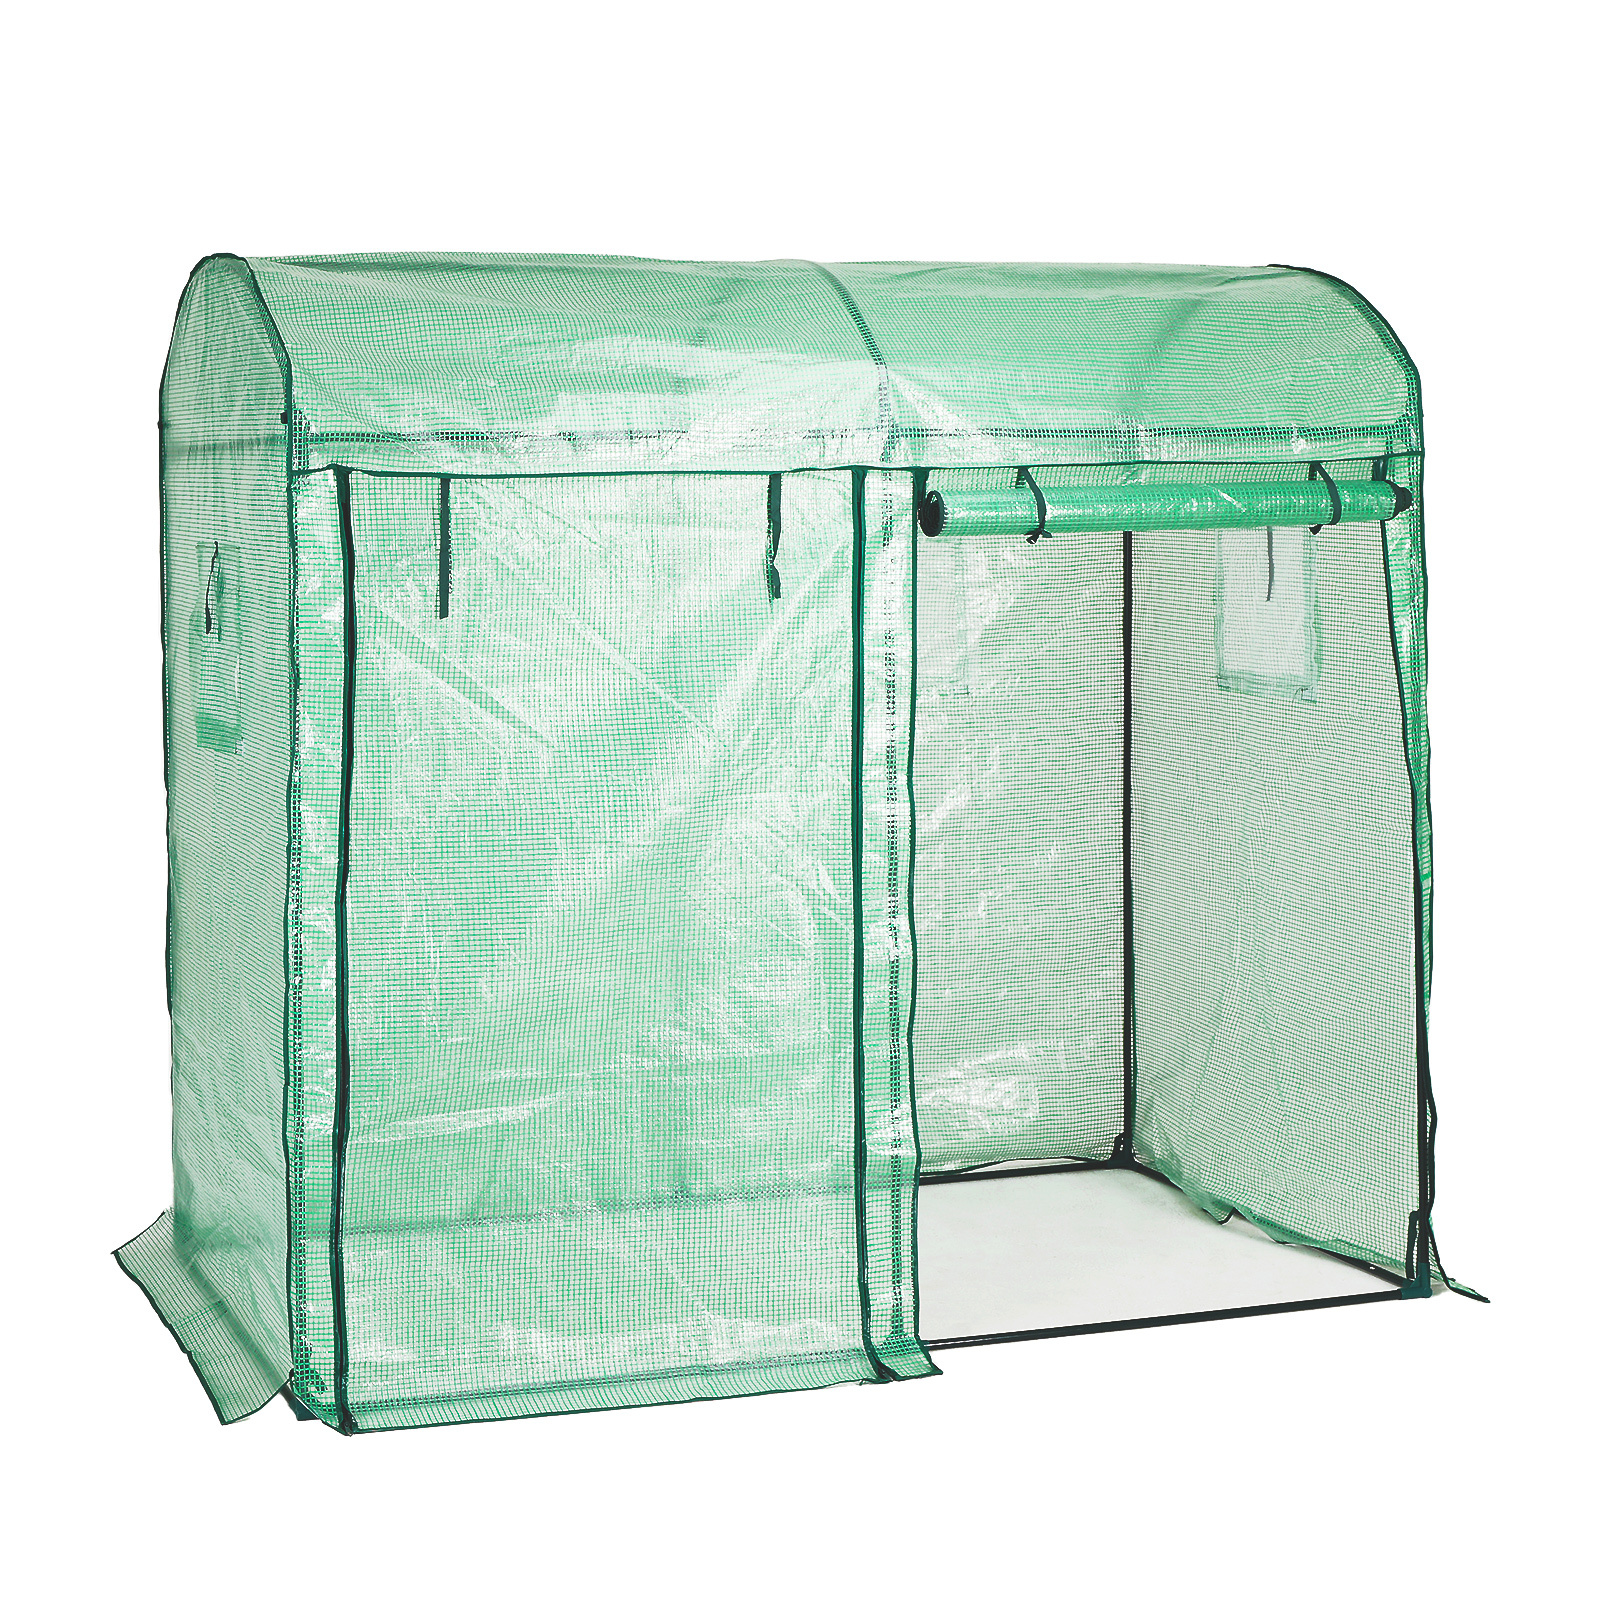 2X1X1.8M Greenhouse PE Dome Roof - GREEN